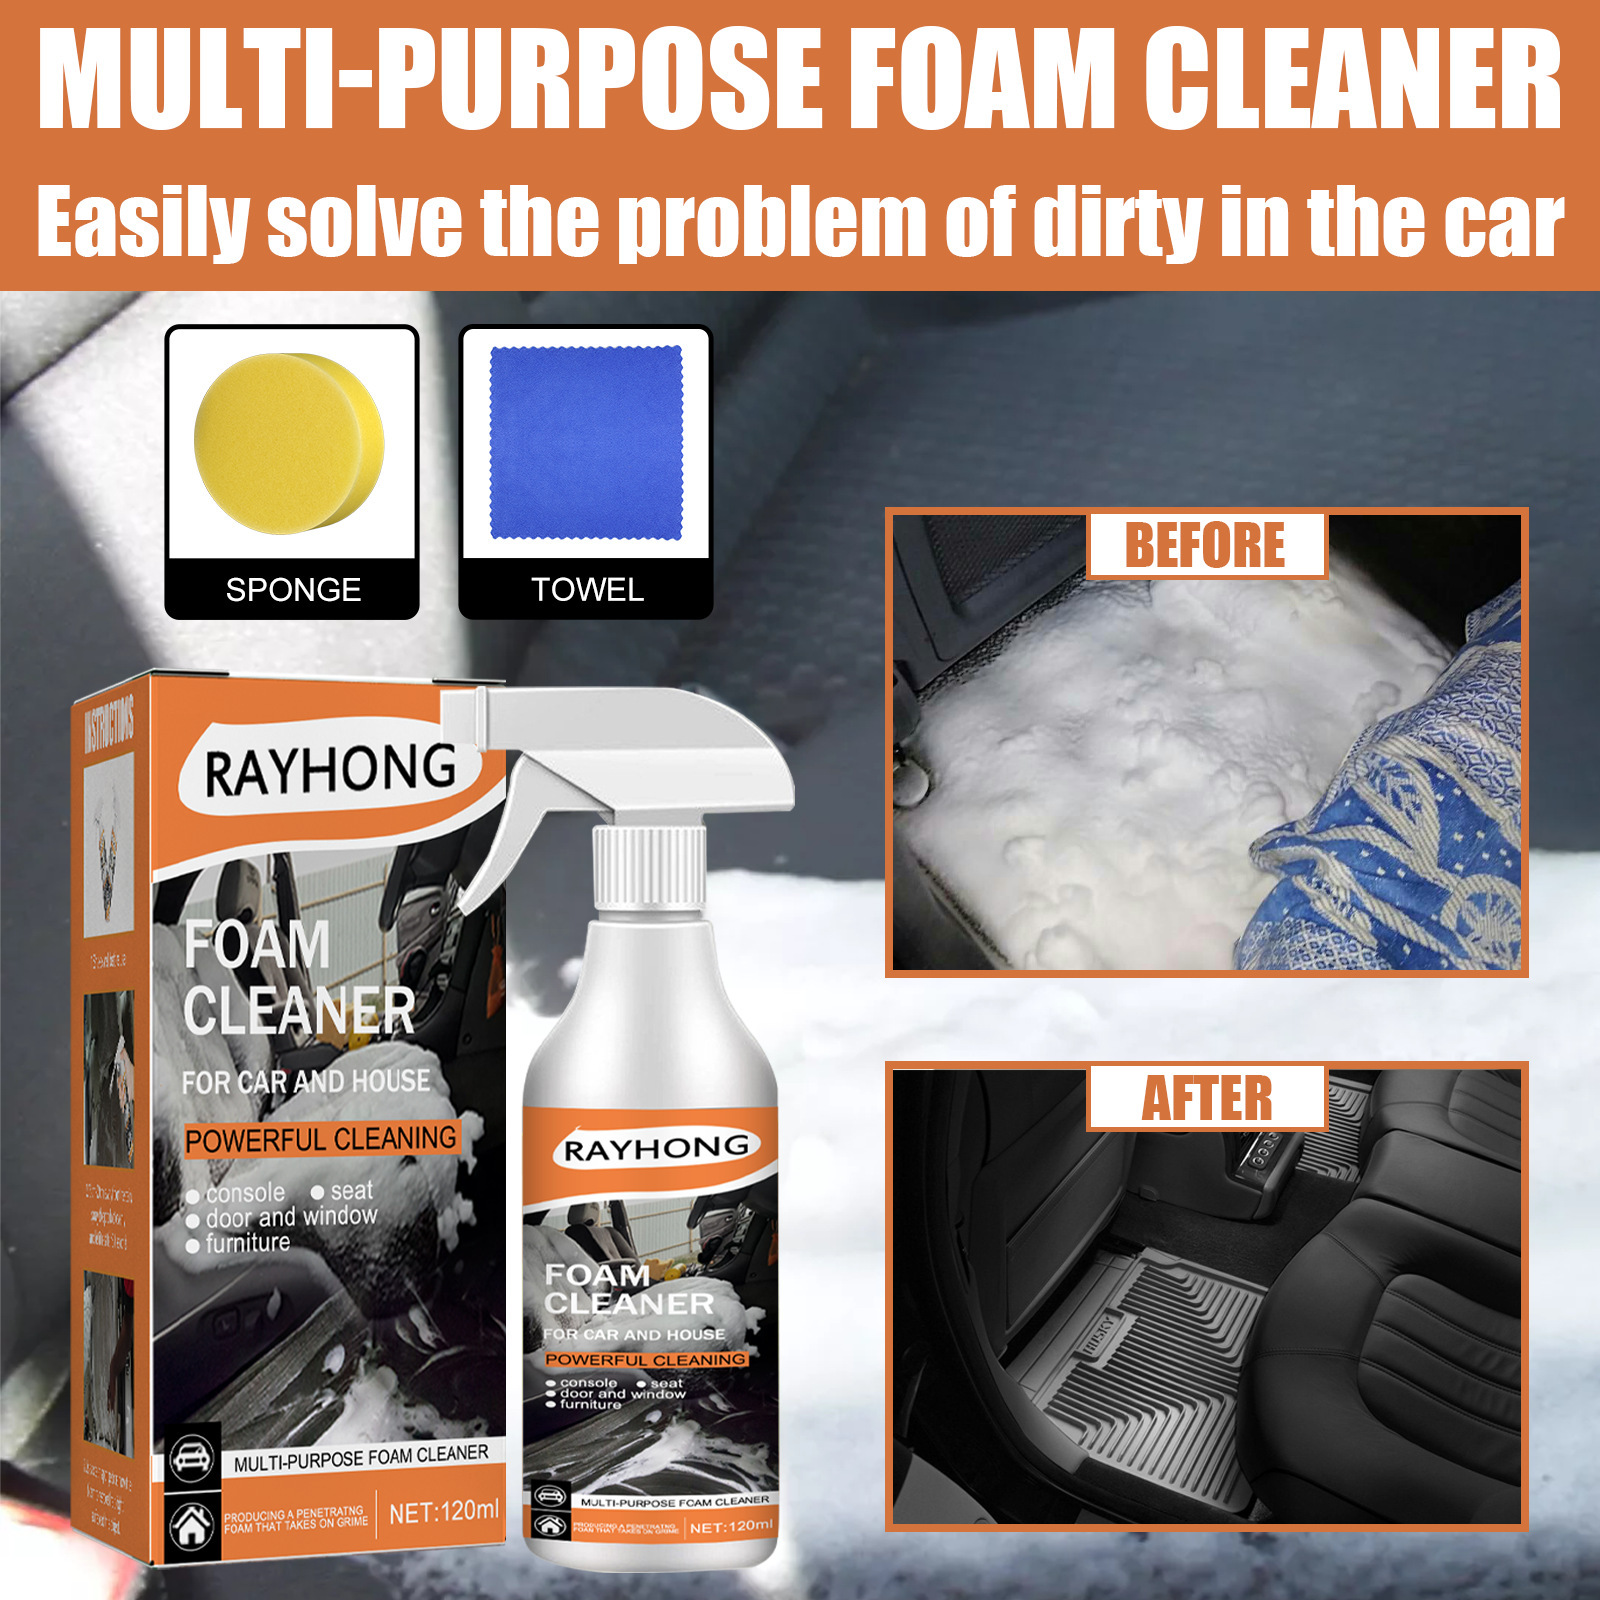 Car Magic Foam Cleaner, Foam Cleaner for Car, Foam Cleaner All Purpose, Multi-Purpose Foam Cleaner, Powerful Stain Removal Kit (30ml, 3pcs)